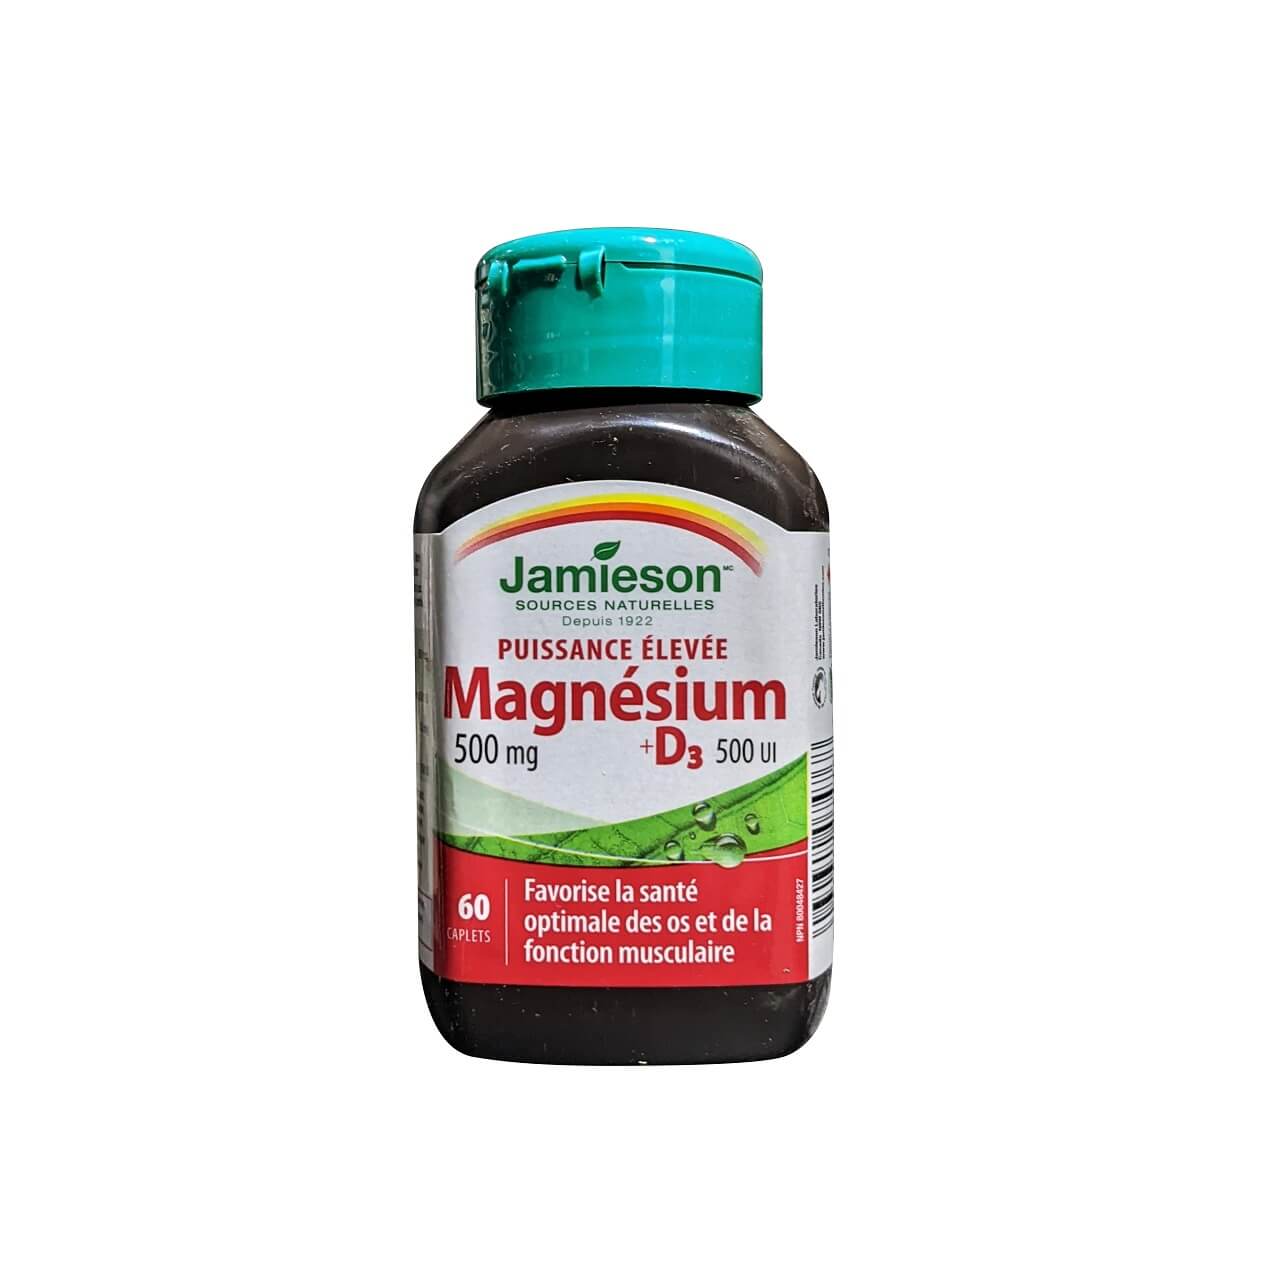 Product label for Jamieson Magnesium (500 mg) and Vitamin D3 (500 IU) High Potency (60 tablets) in French